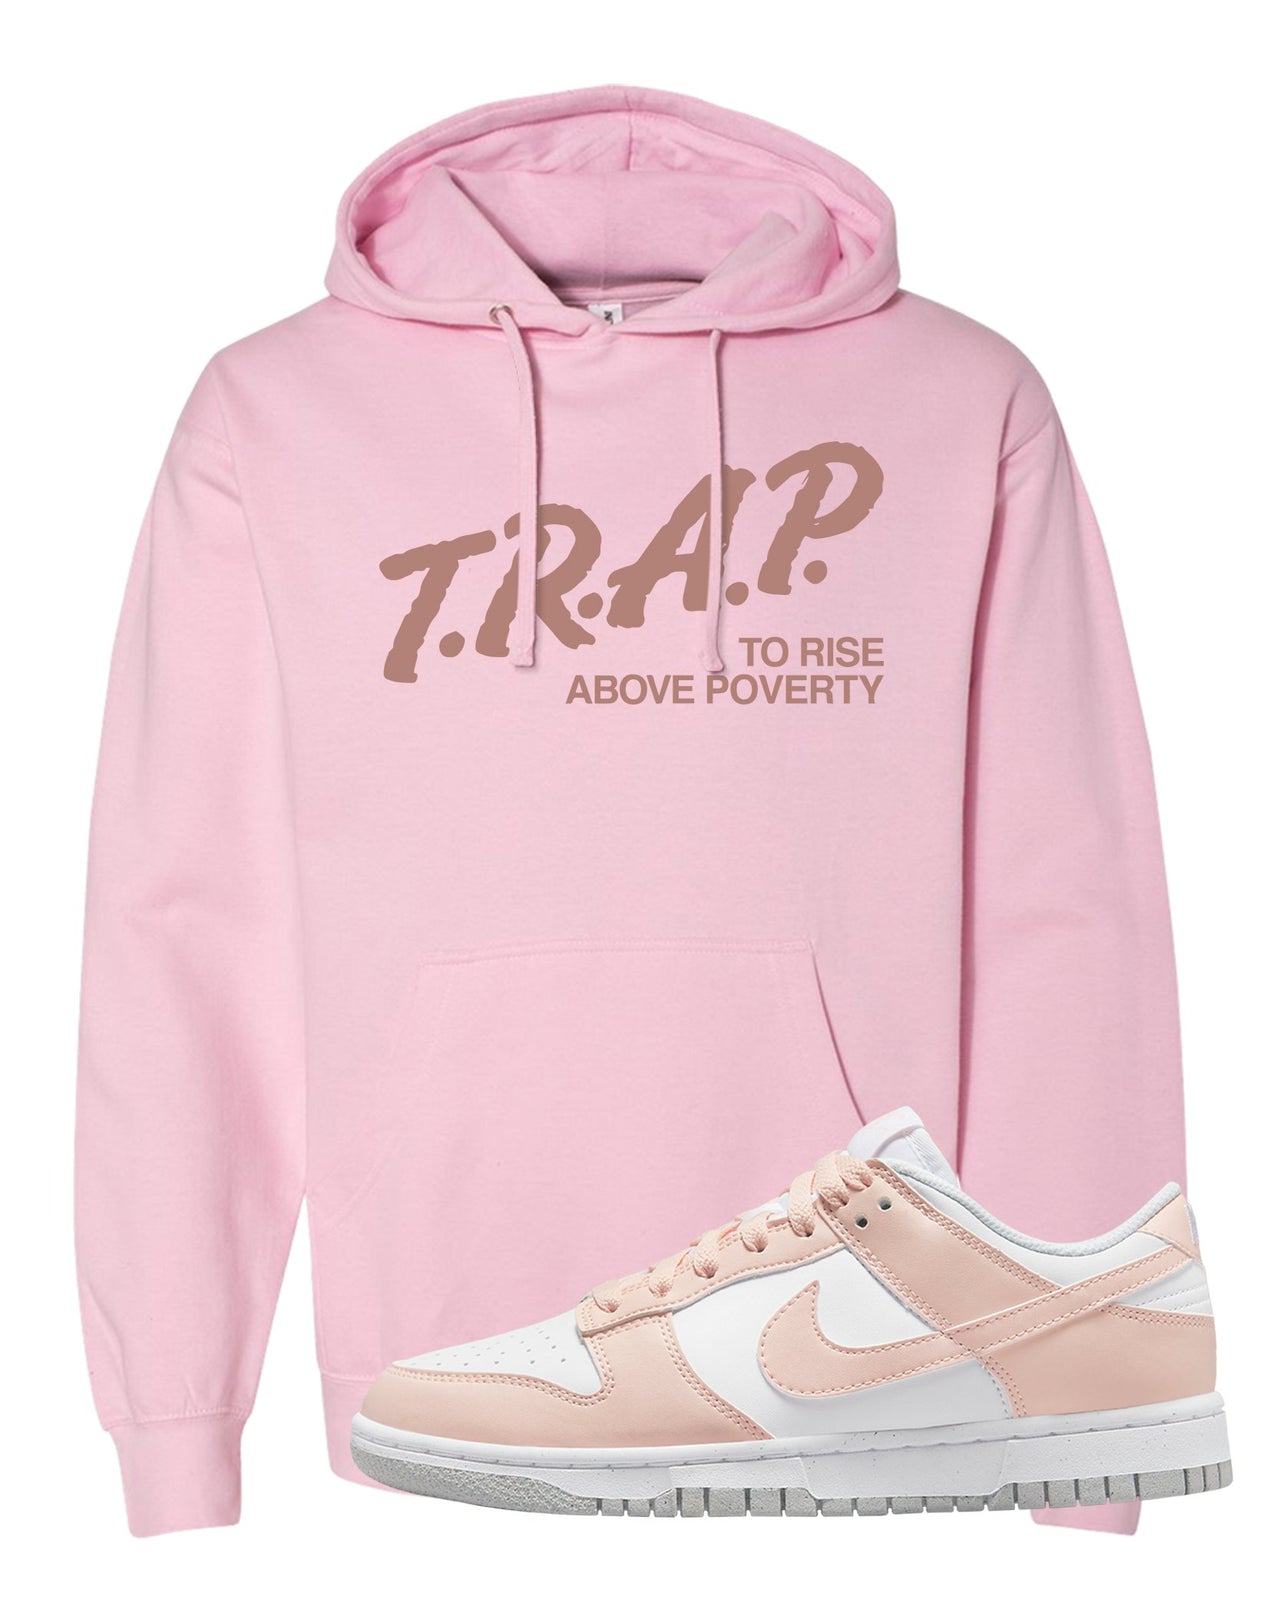 Next Nature Pale Citrus Low Dunks Hoodie | Trap To Rise Above Poverty, Light Pink